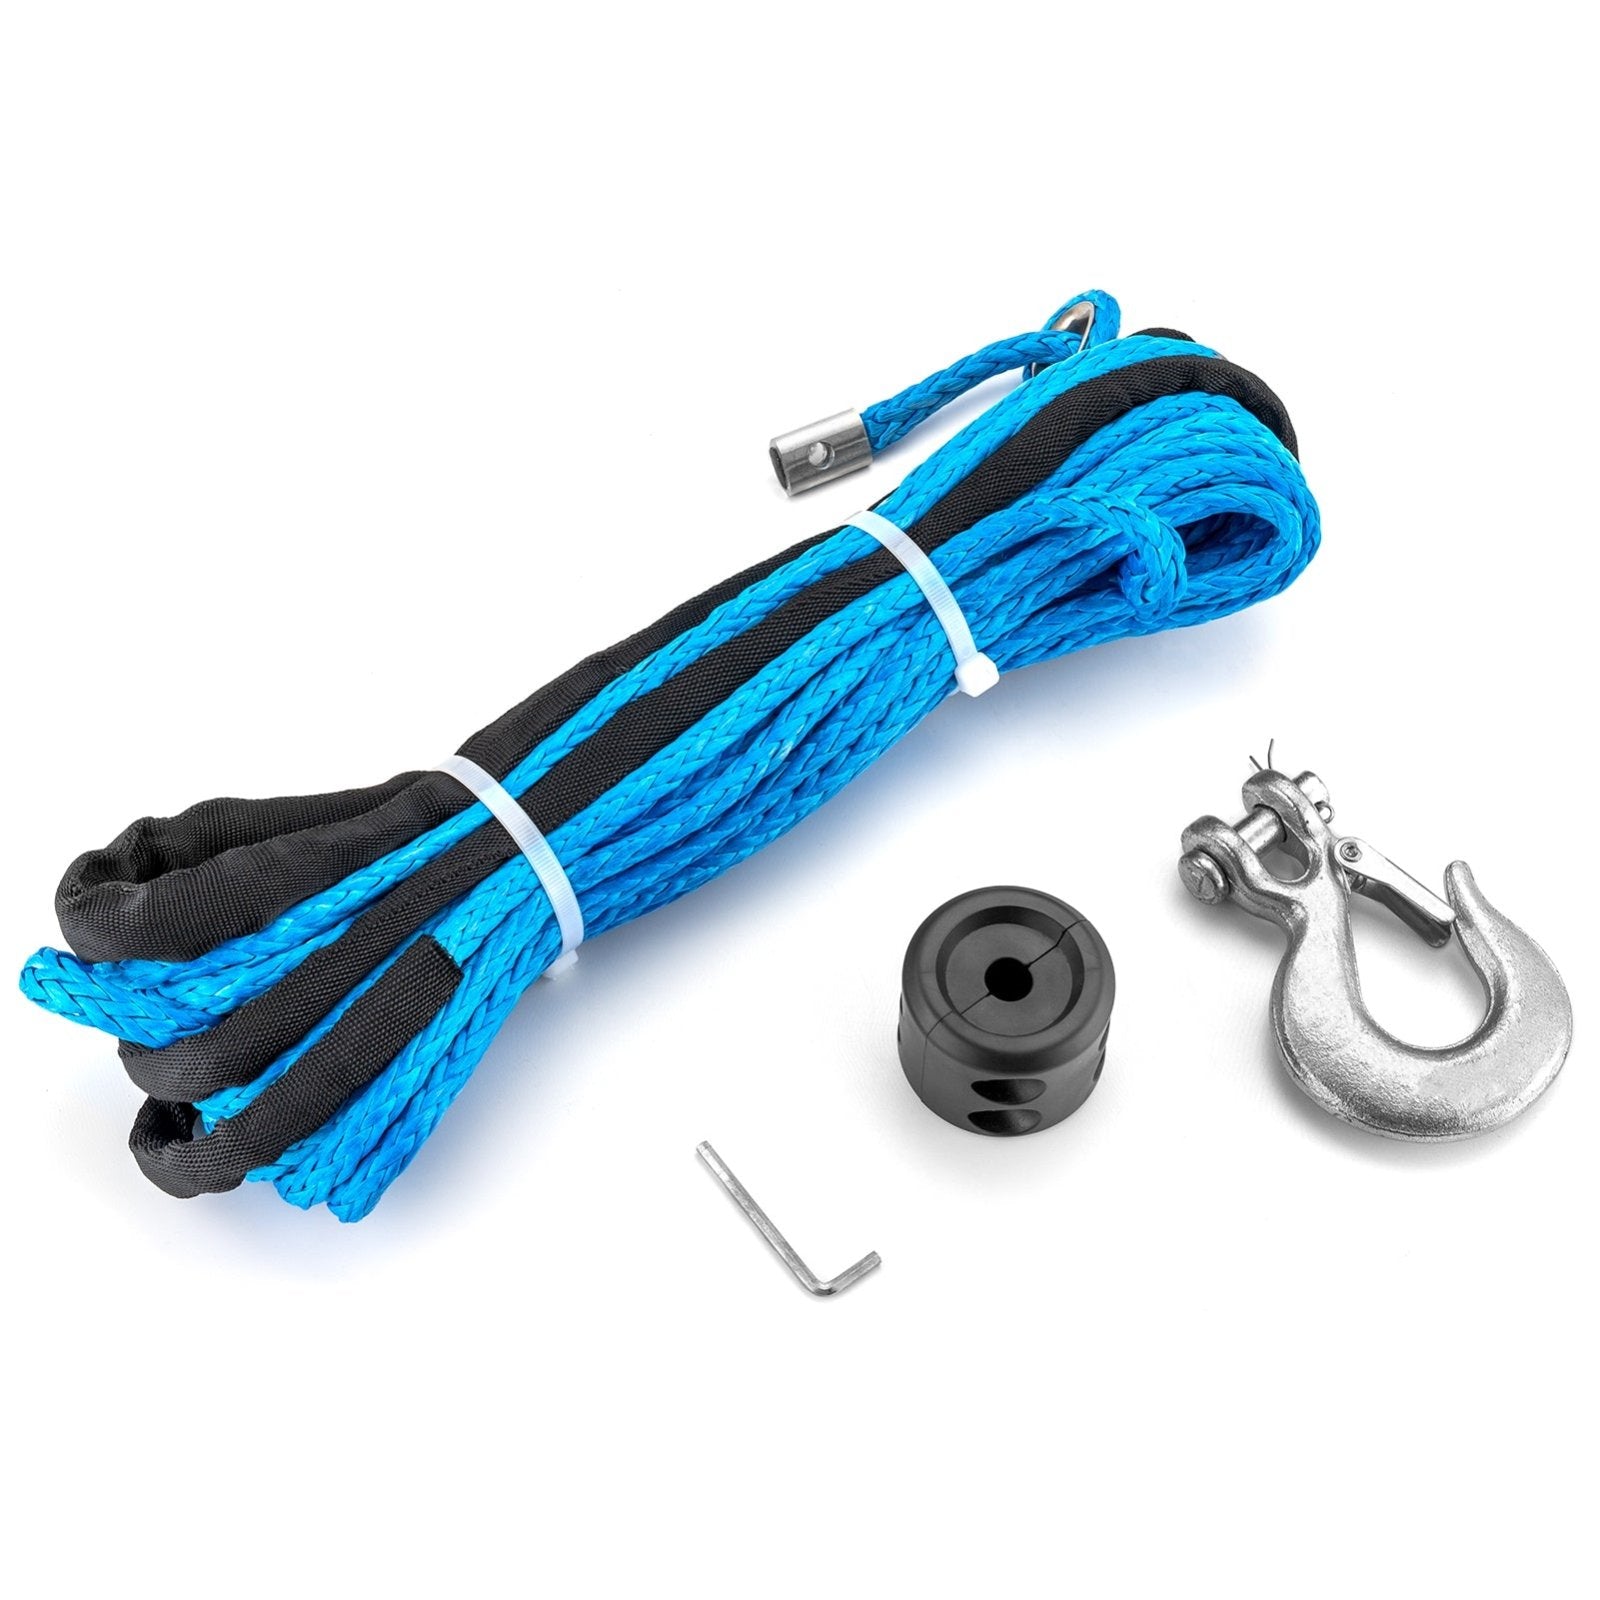 5/16 x 50' 8500lbs Synthetic Winch Rope + Hook + Stopper for ATV UTV SUV Truck Winch